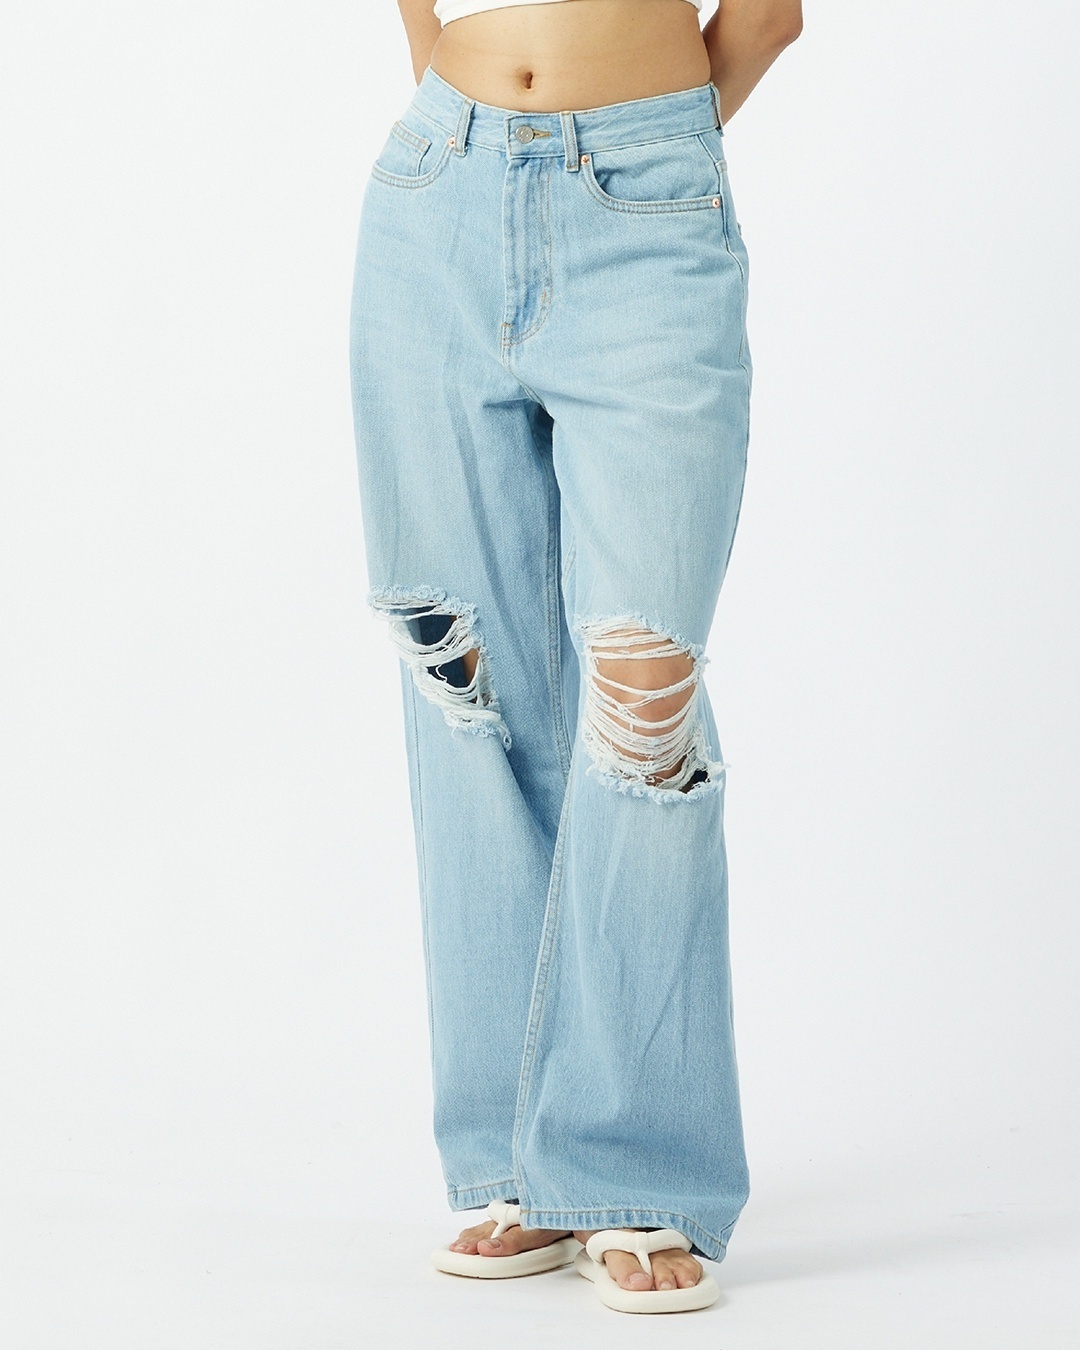 fcity.in - Angelfab High Loose Jeans / Stylish Elegant Women Jeans